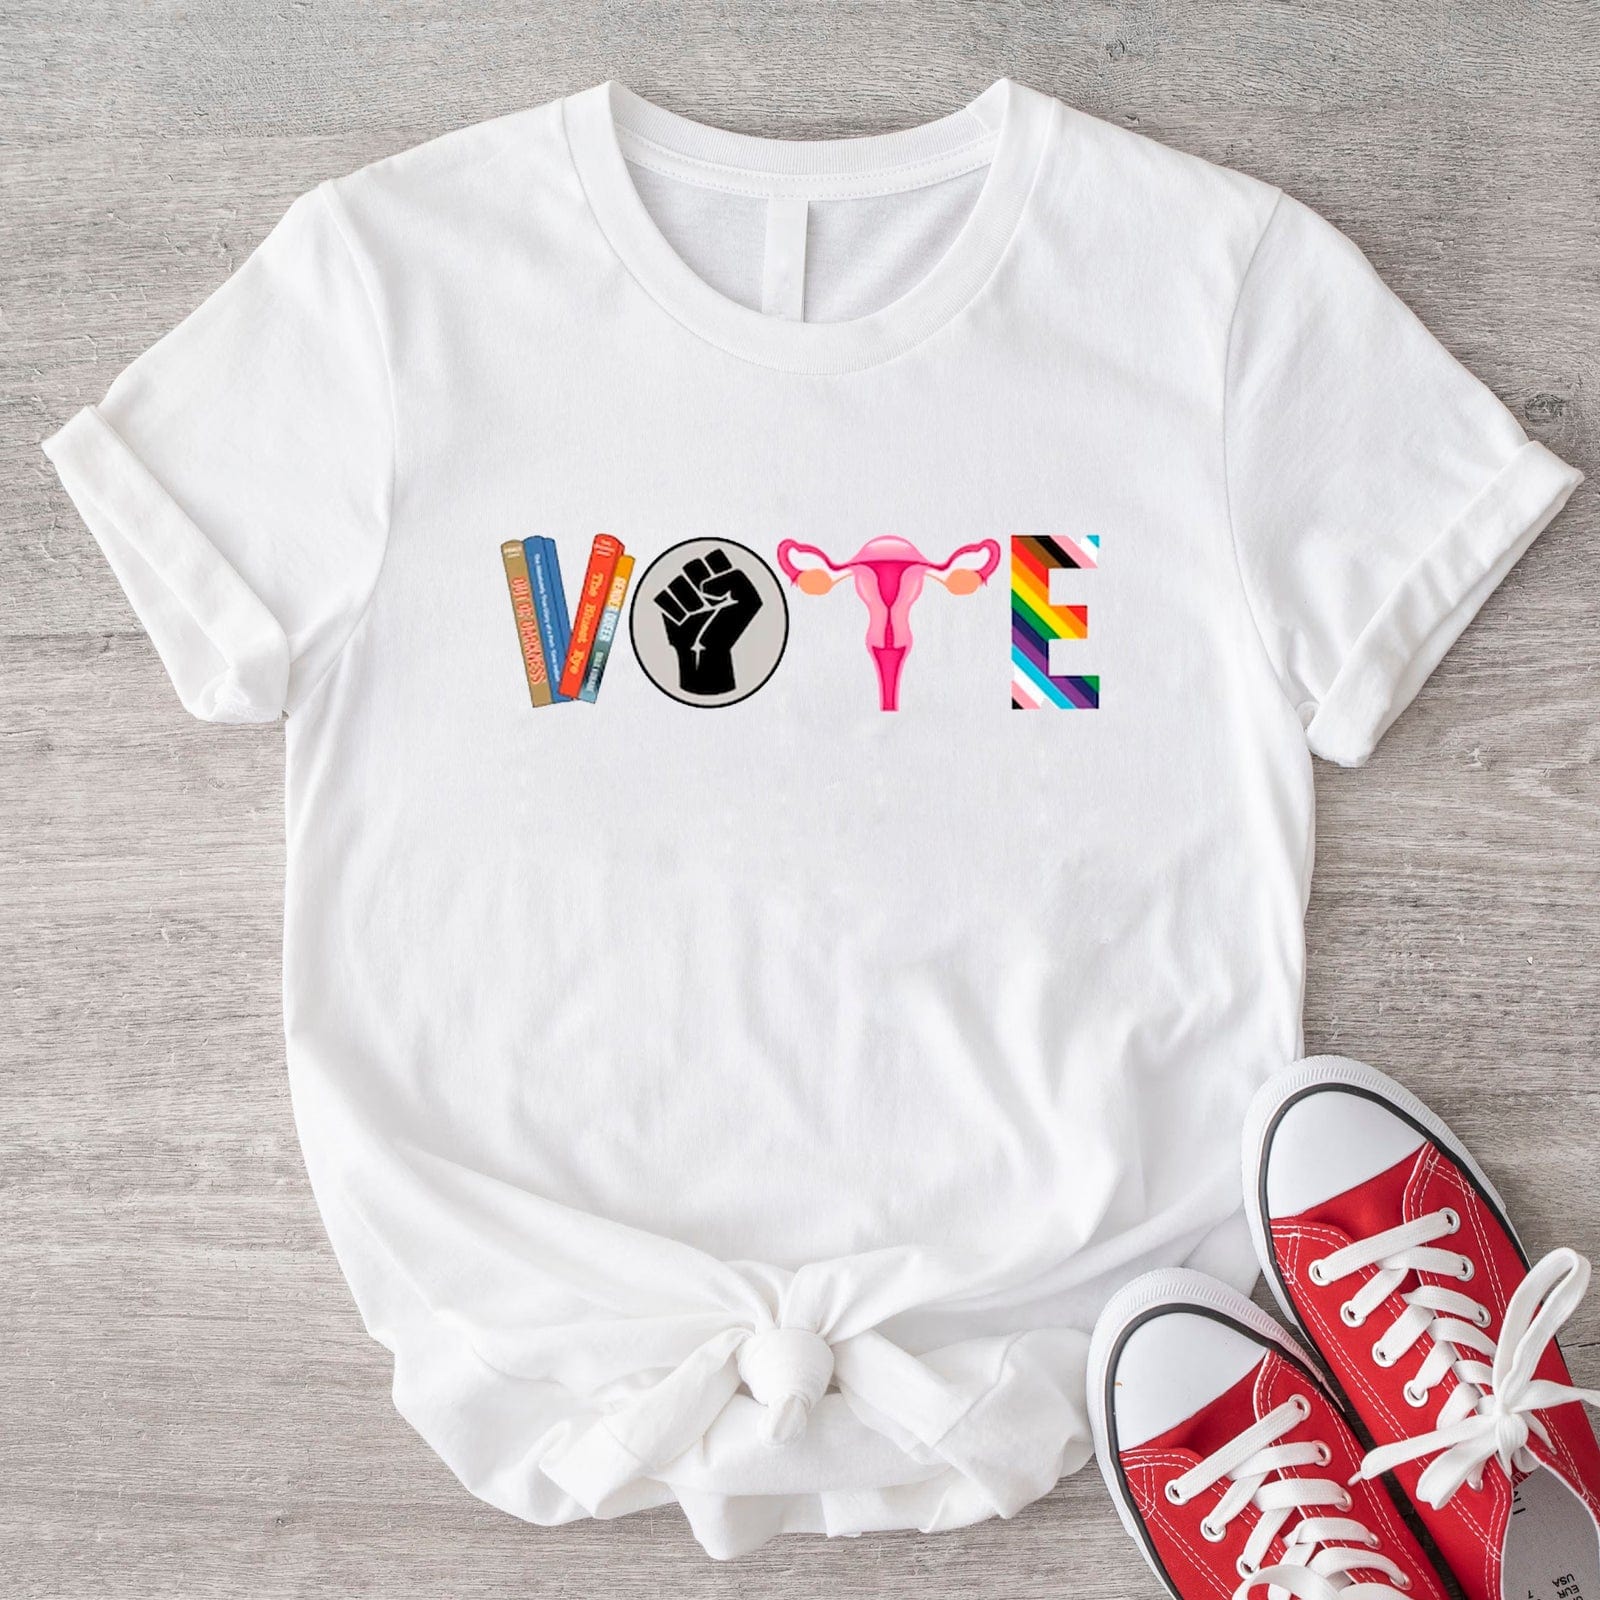 Vote LGBT Shirt, Banned Books Shirt, Reproductive Rights Tee